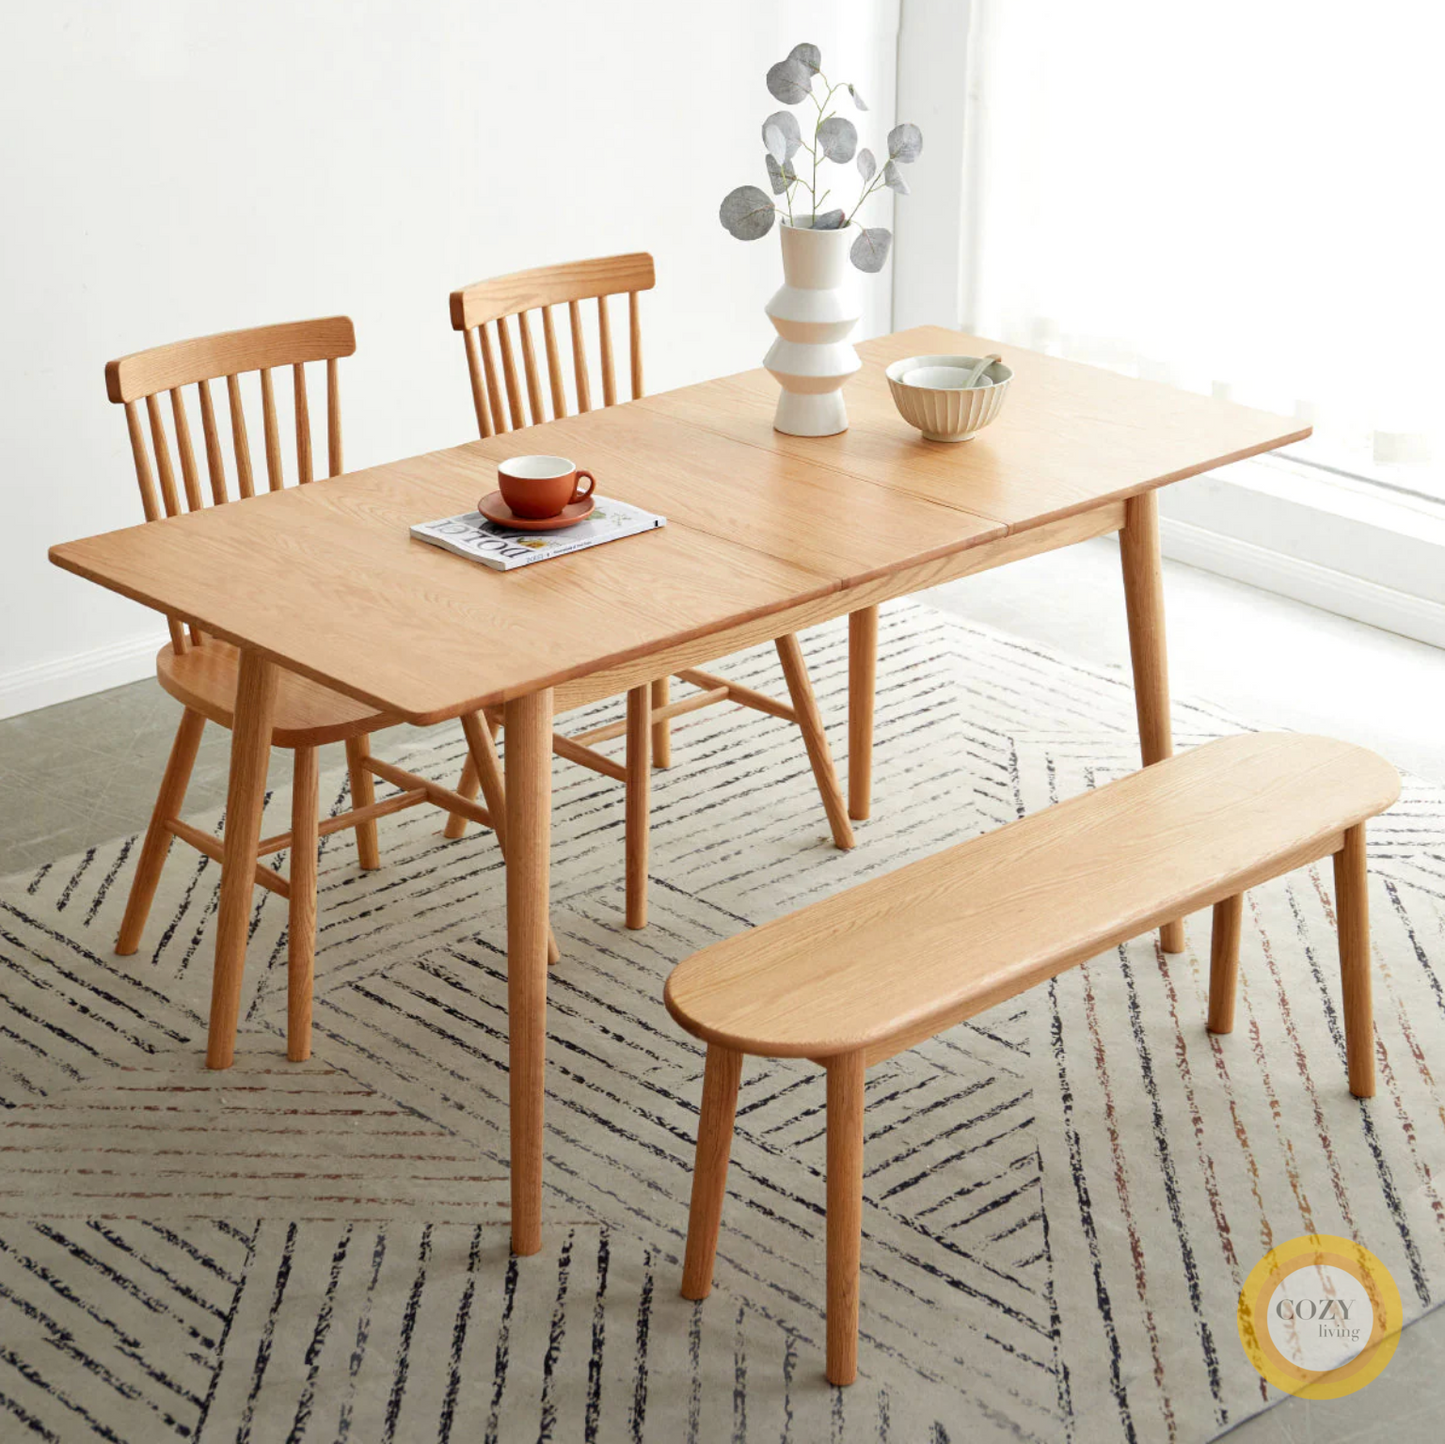 12 Fincham retractable solid wood table